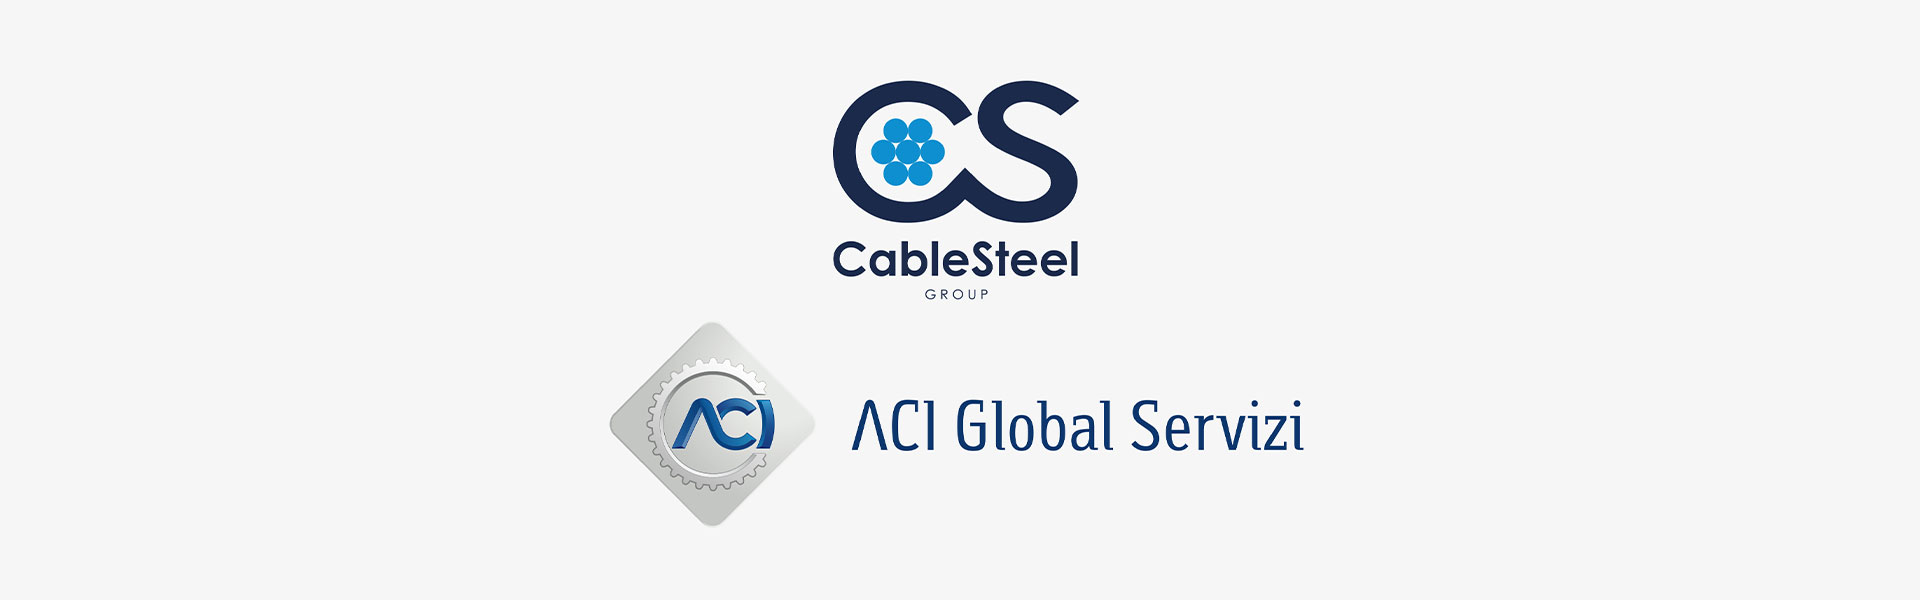 Our CABLES Division is a partner of ACI Global Servizi